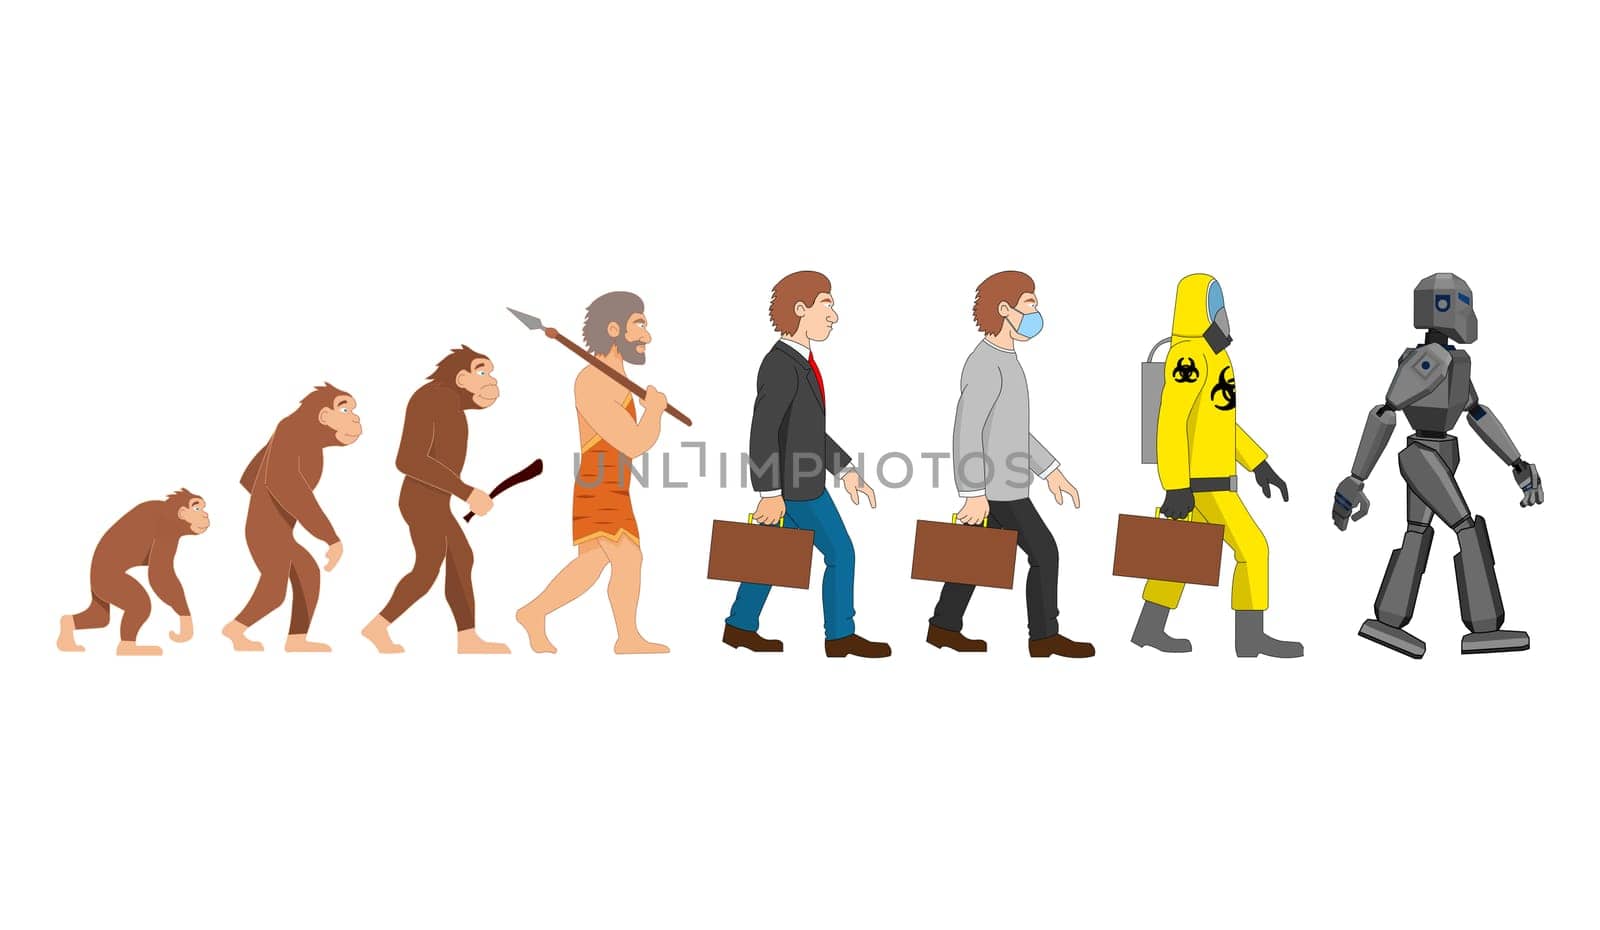 The evolution from past of monkeys to our future of robots.